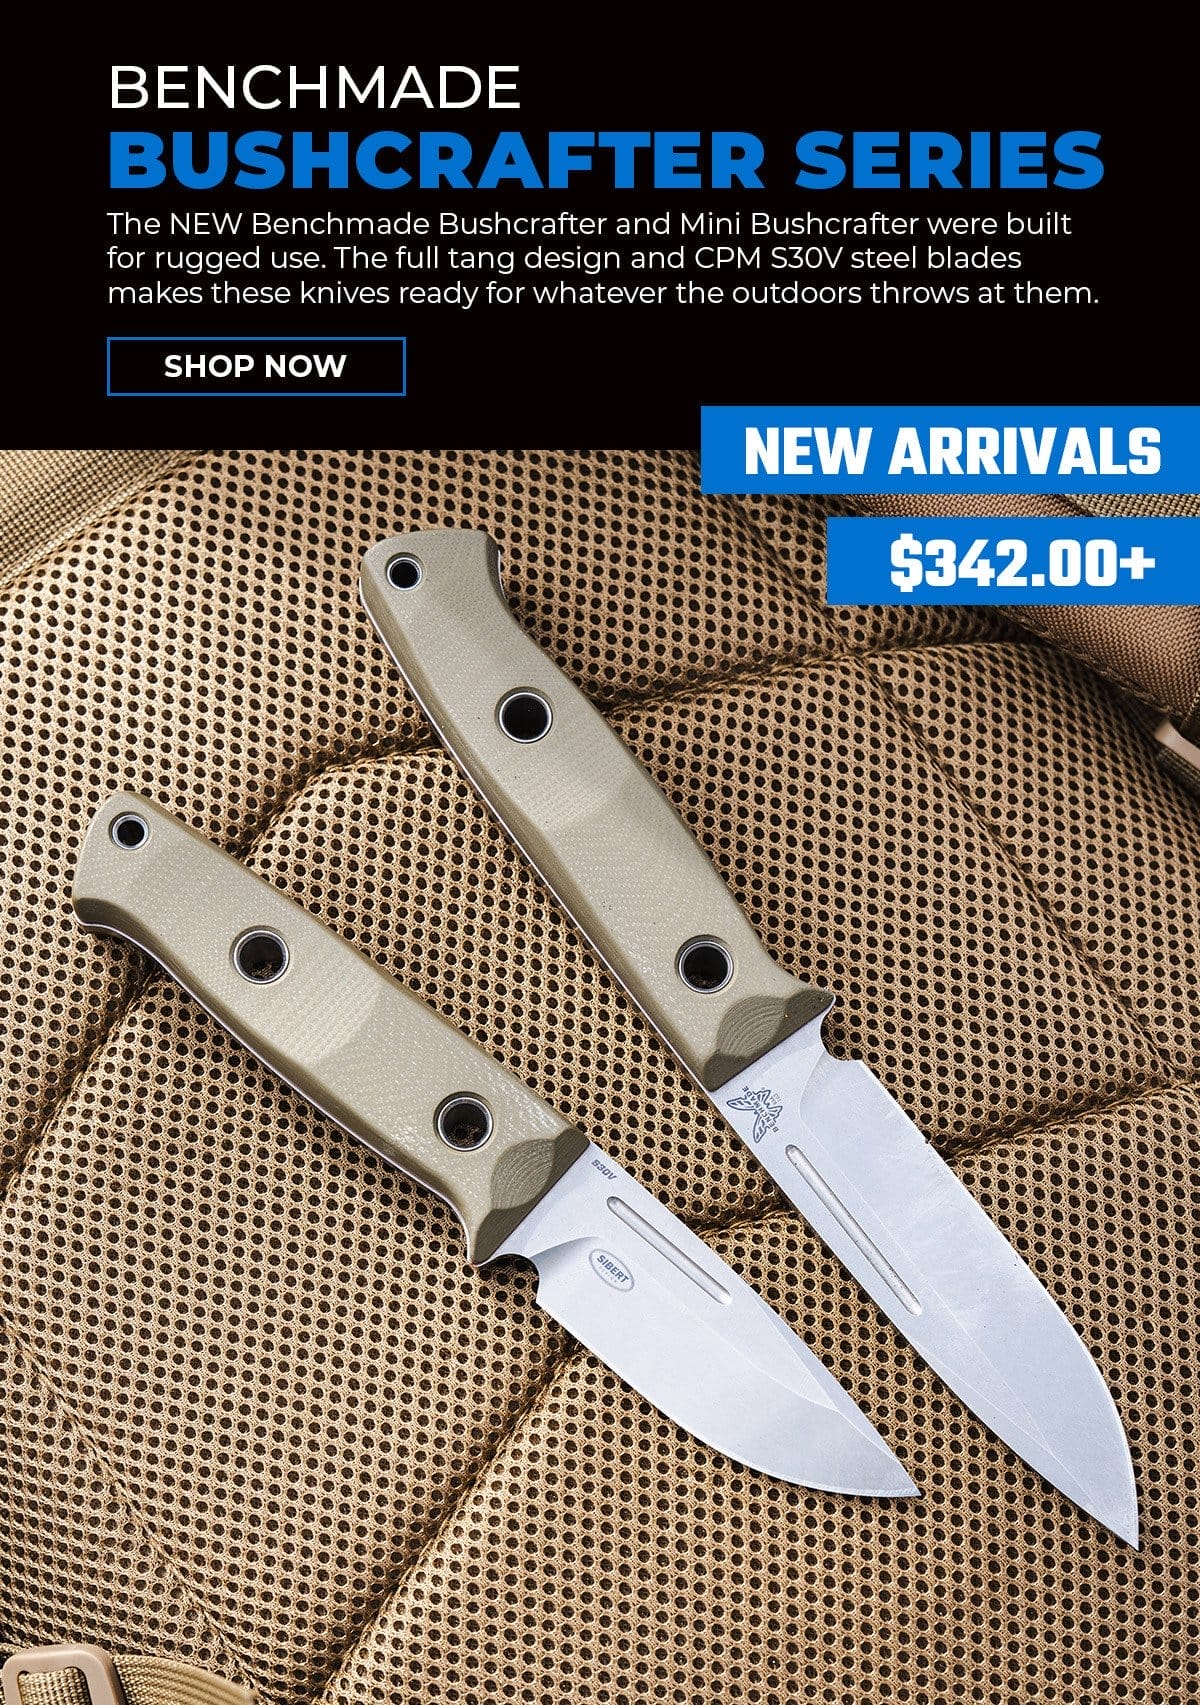 Benchmade Bushcrafter Series